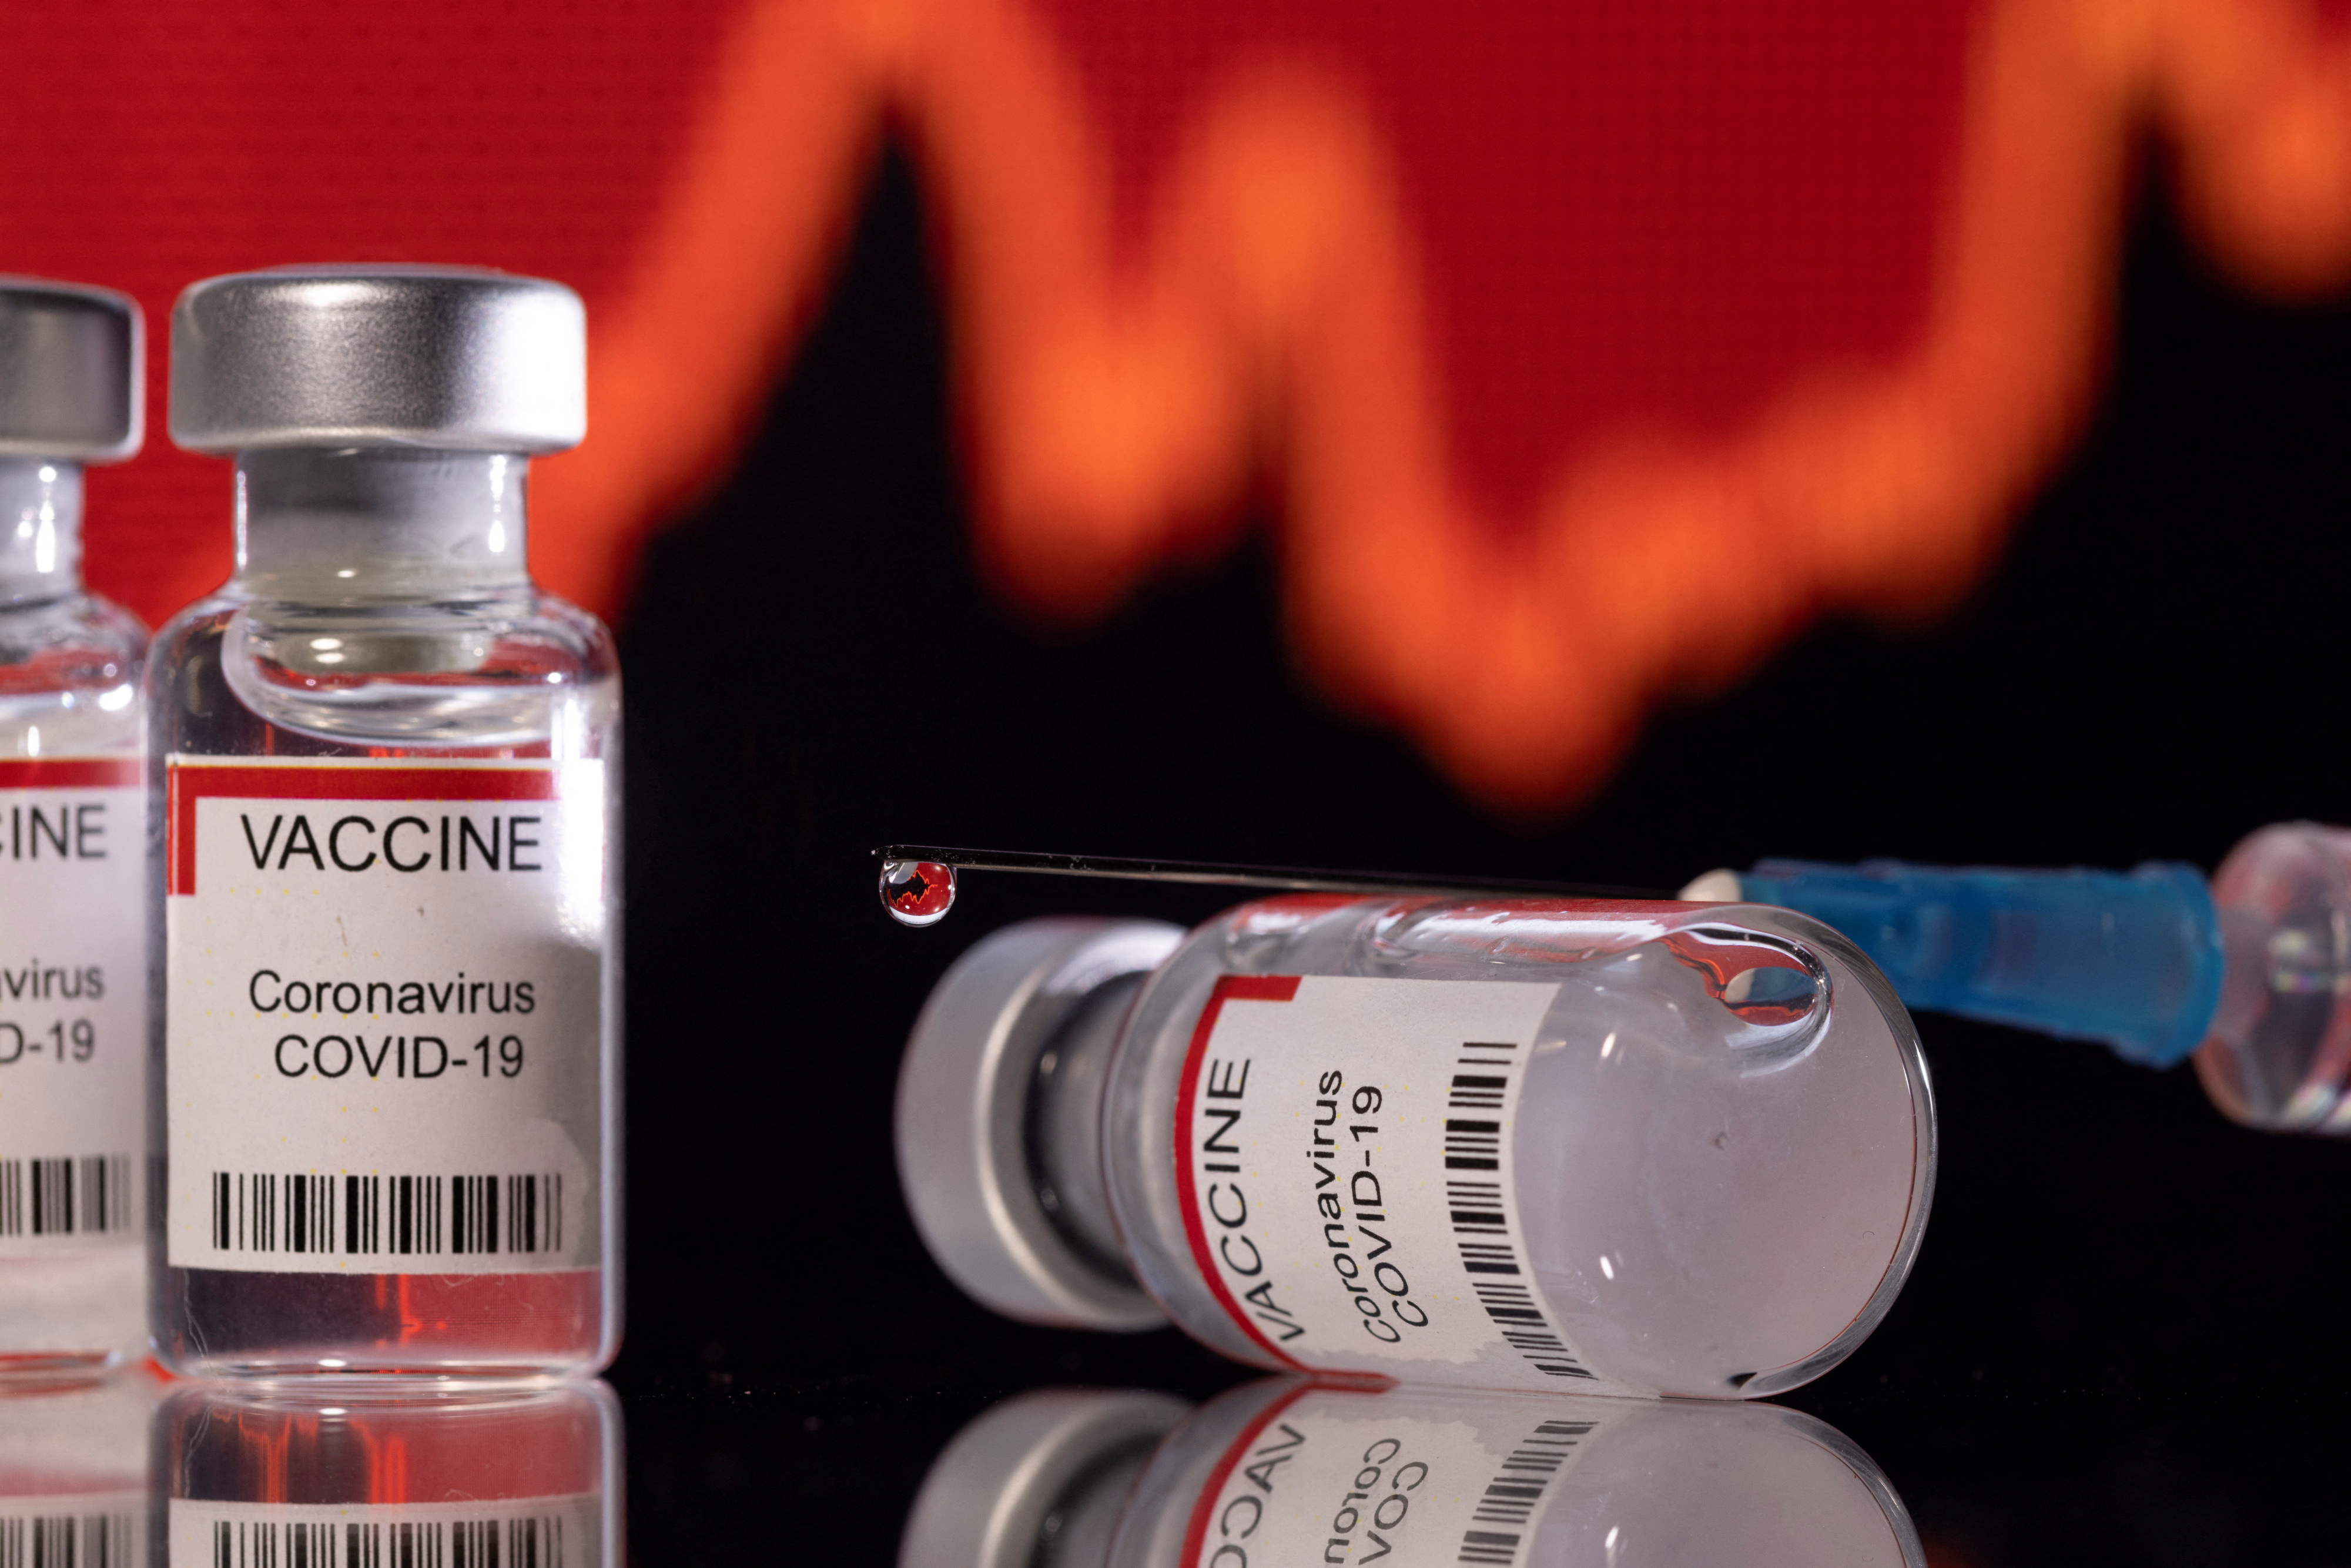 Illustration shows vials labelled "VACCINE Coronavirus COVID-19" and a syringe in front of a displayed graph